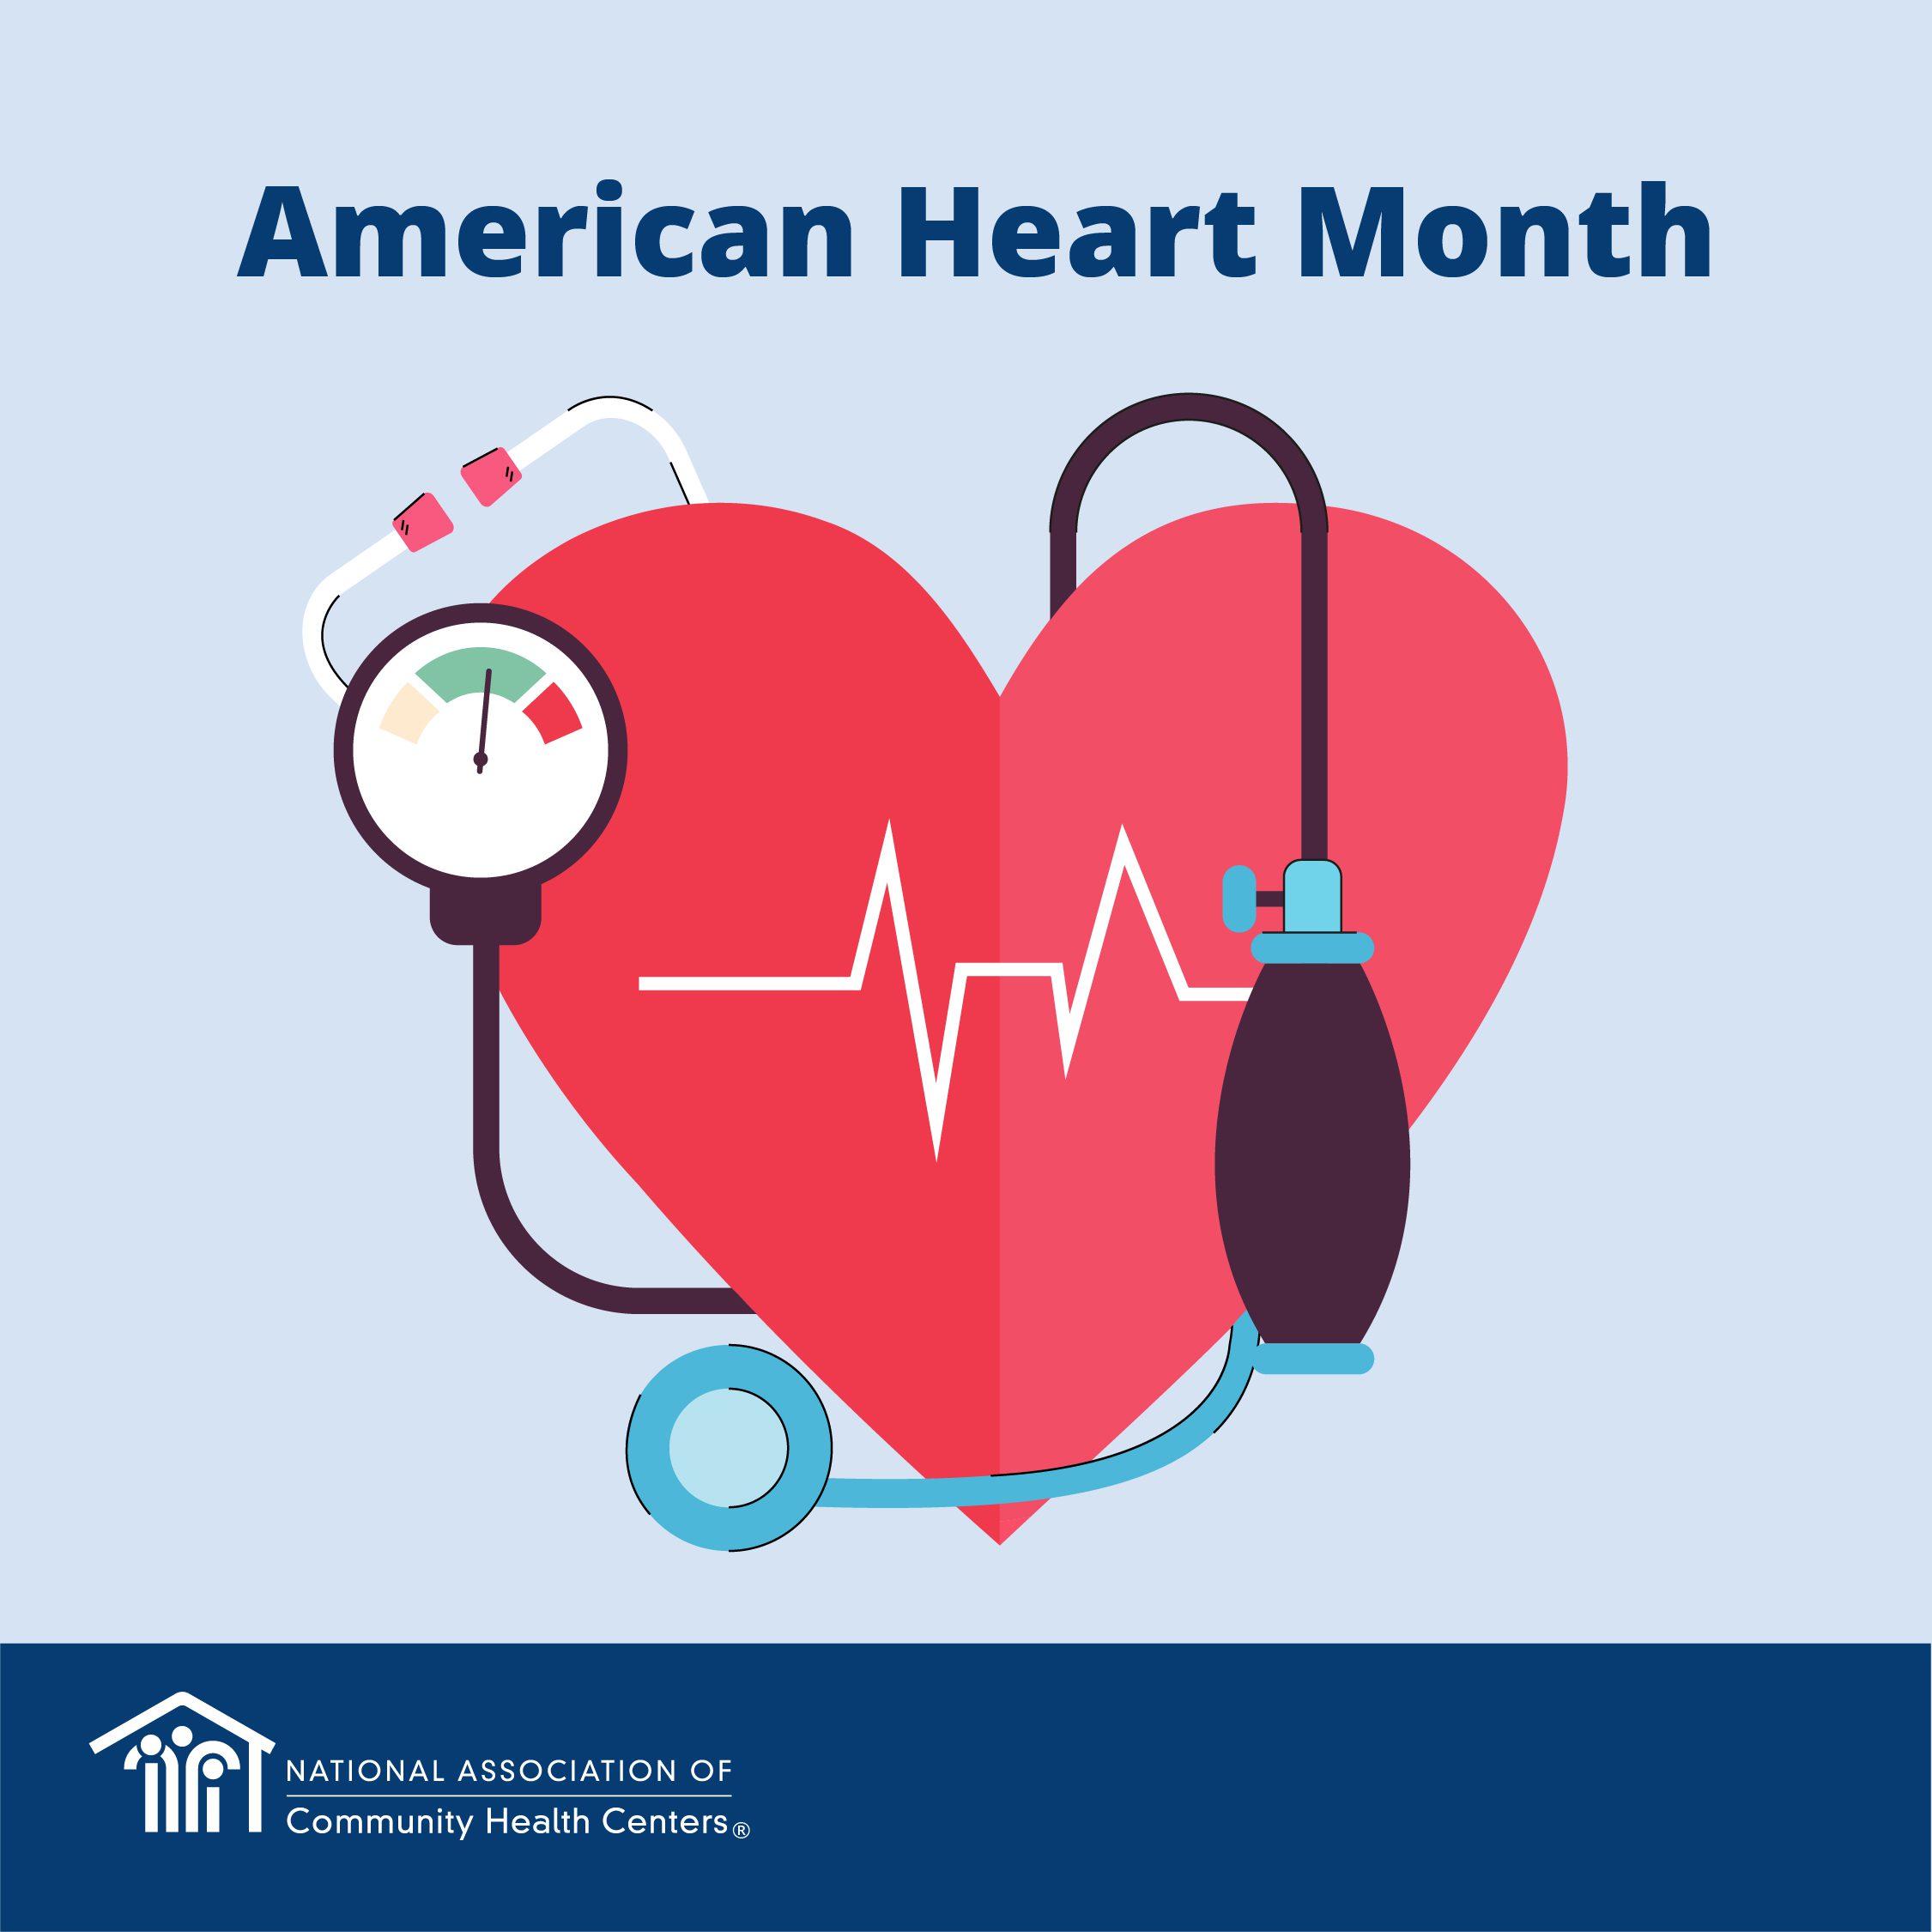 American Heart Month graphic with image of heart and blood pressure cuff